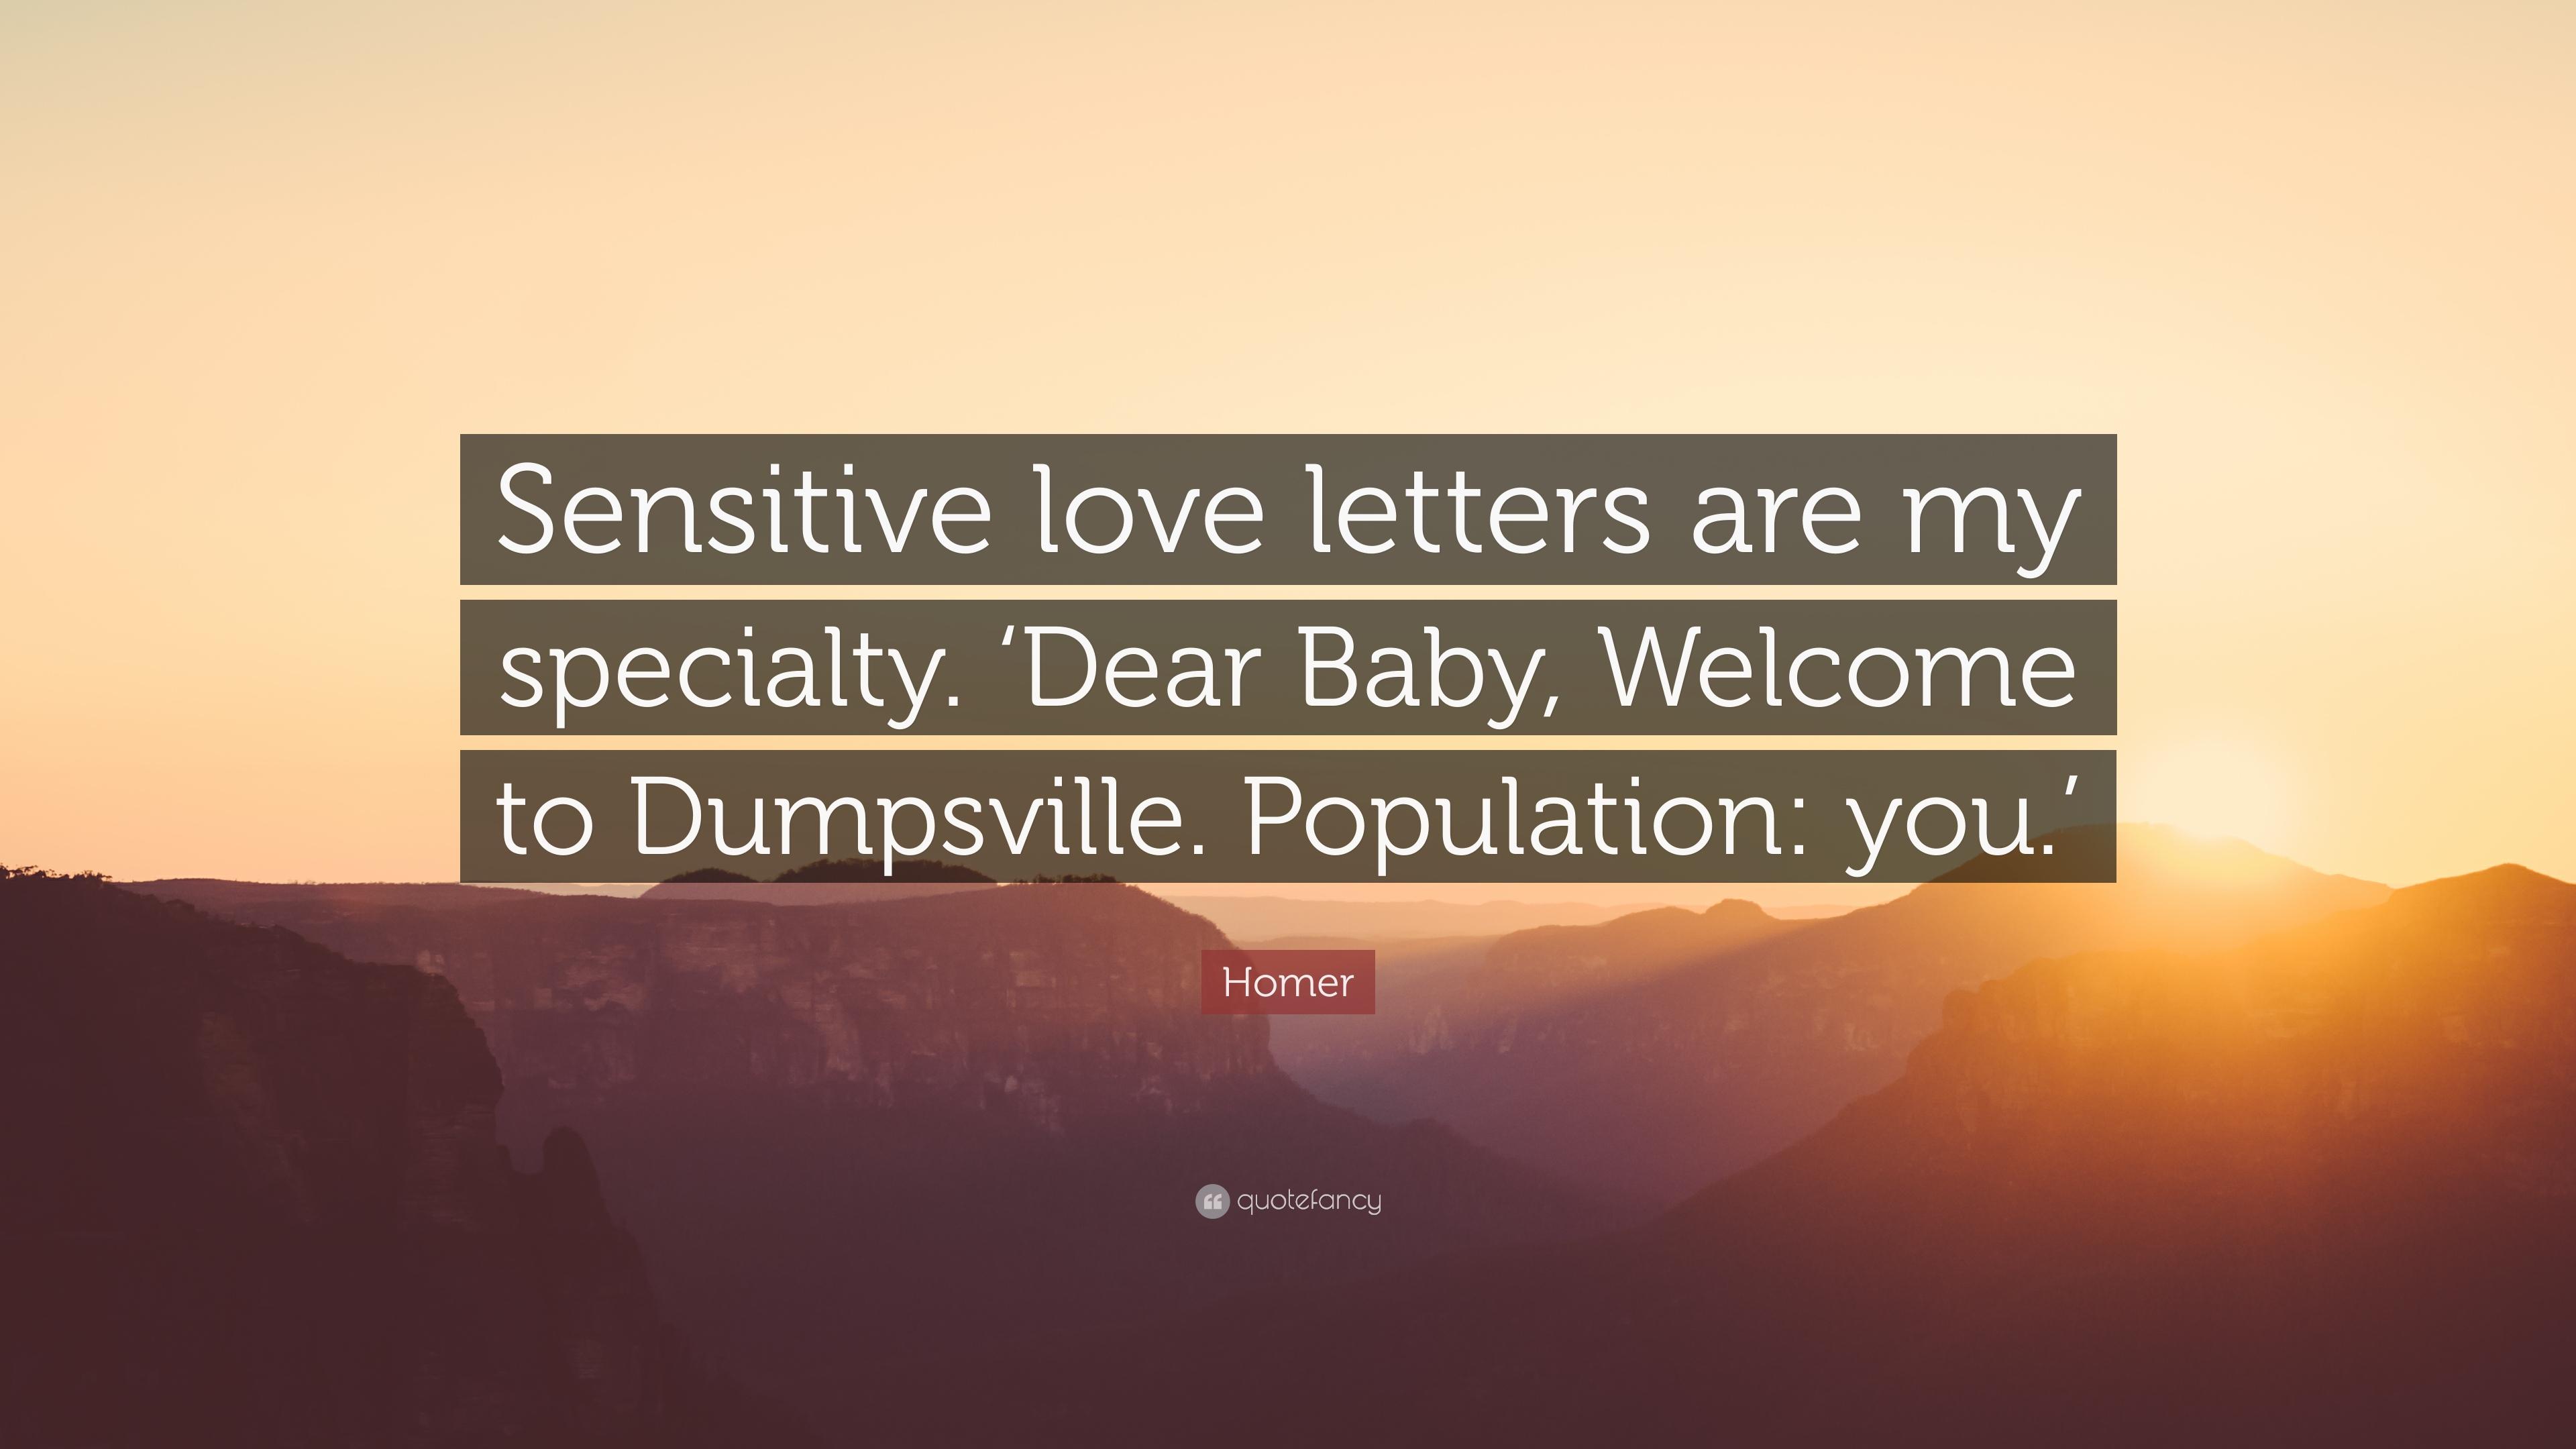 Homer Quote: “Sensitive love letters are my specialty. 'Dear Baby